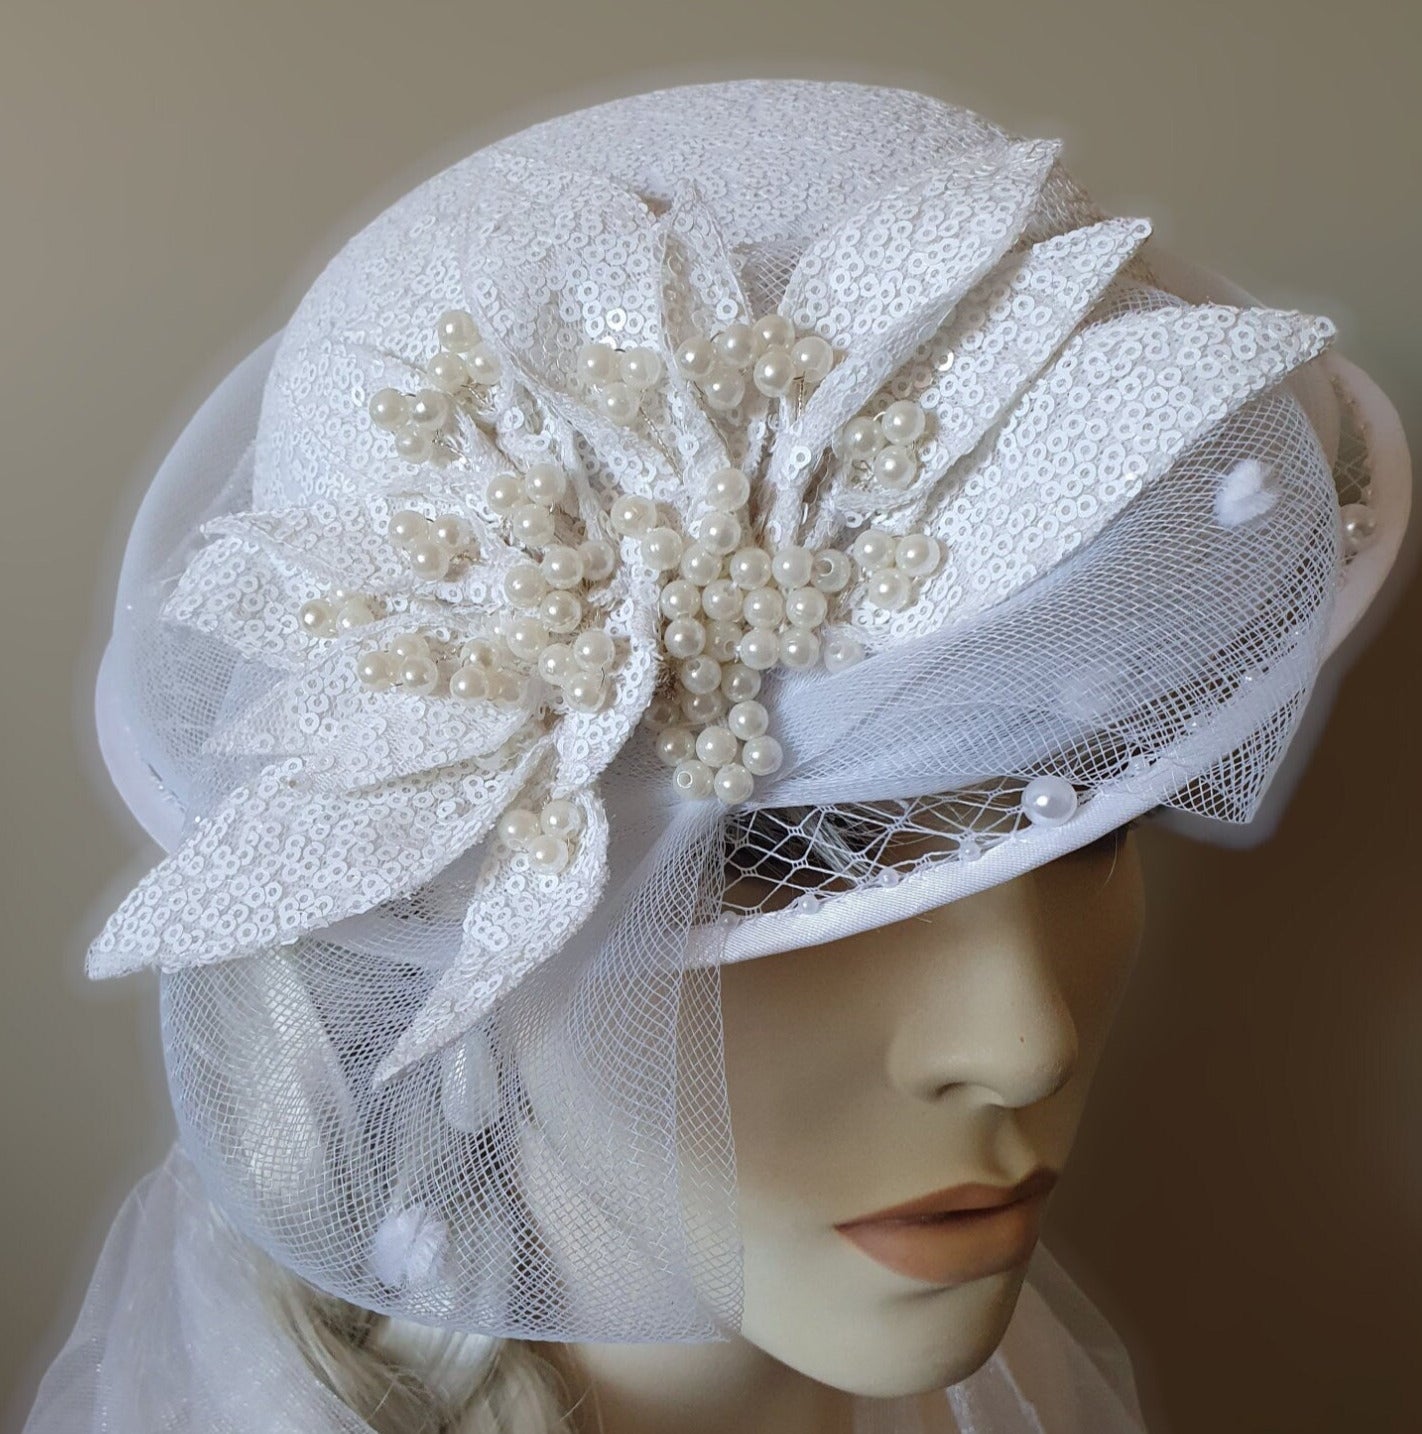 Handmade fascinator made of sequin crinoline material with veil - perfect for weddings and festive occasions